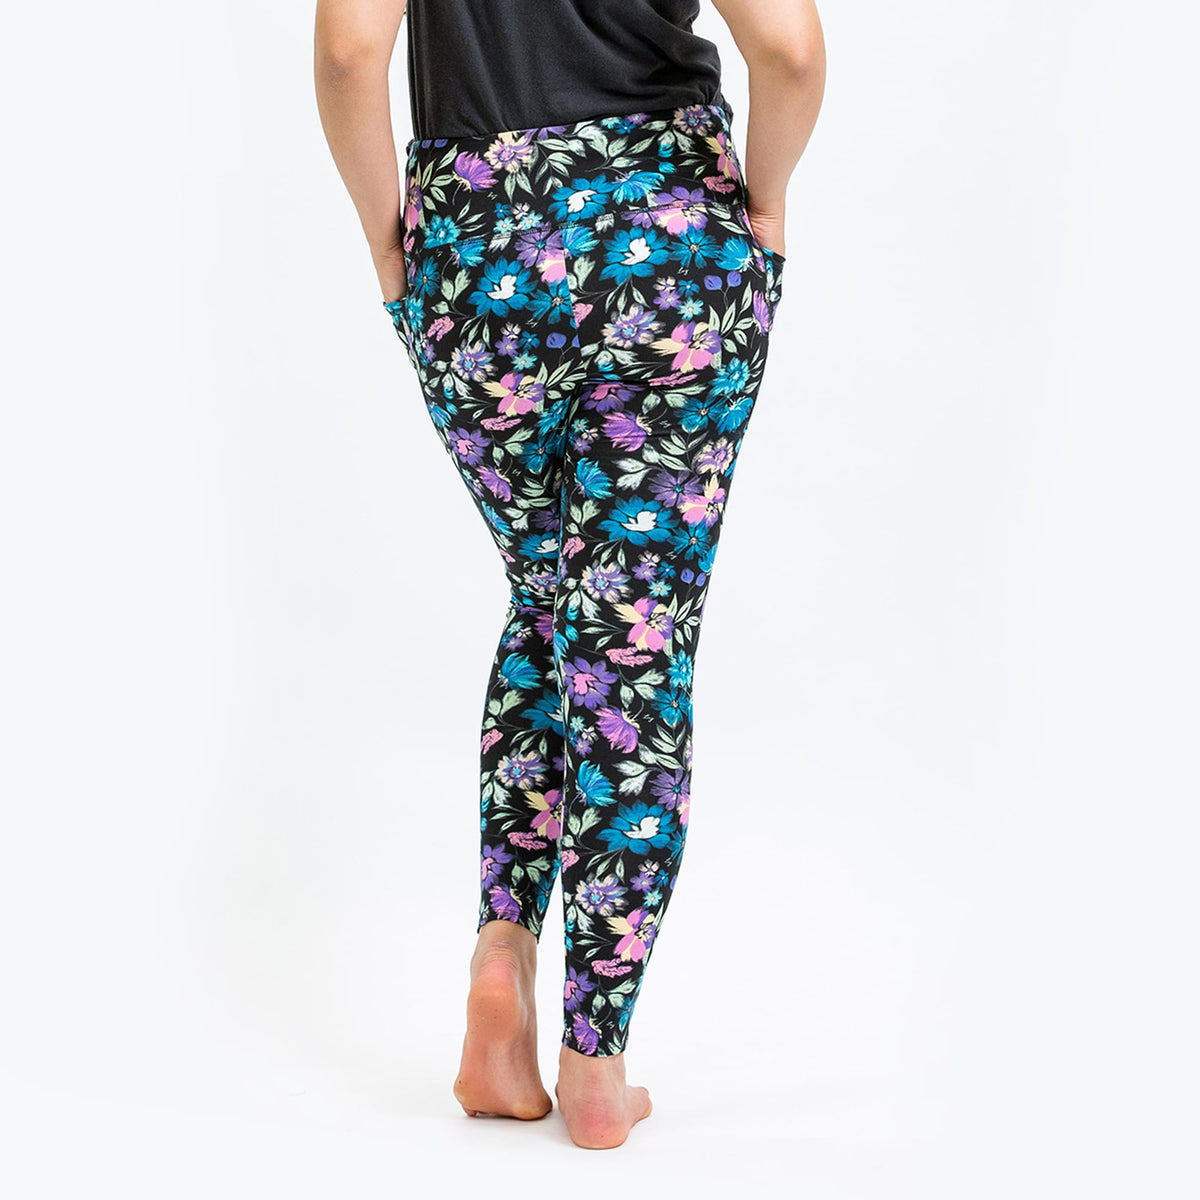 Lugging Ankle Leggings - Prints